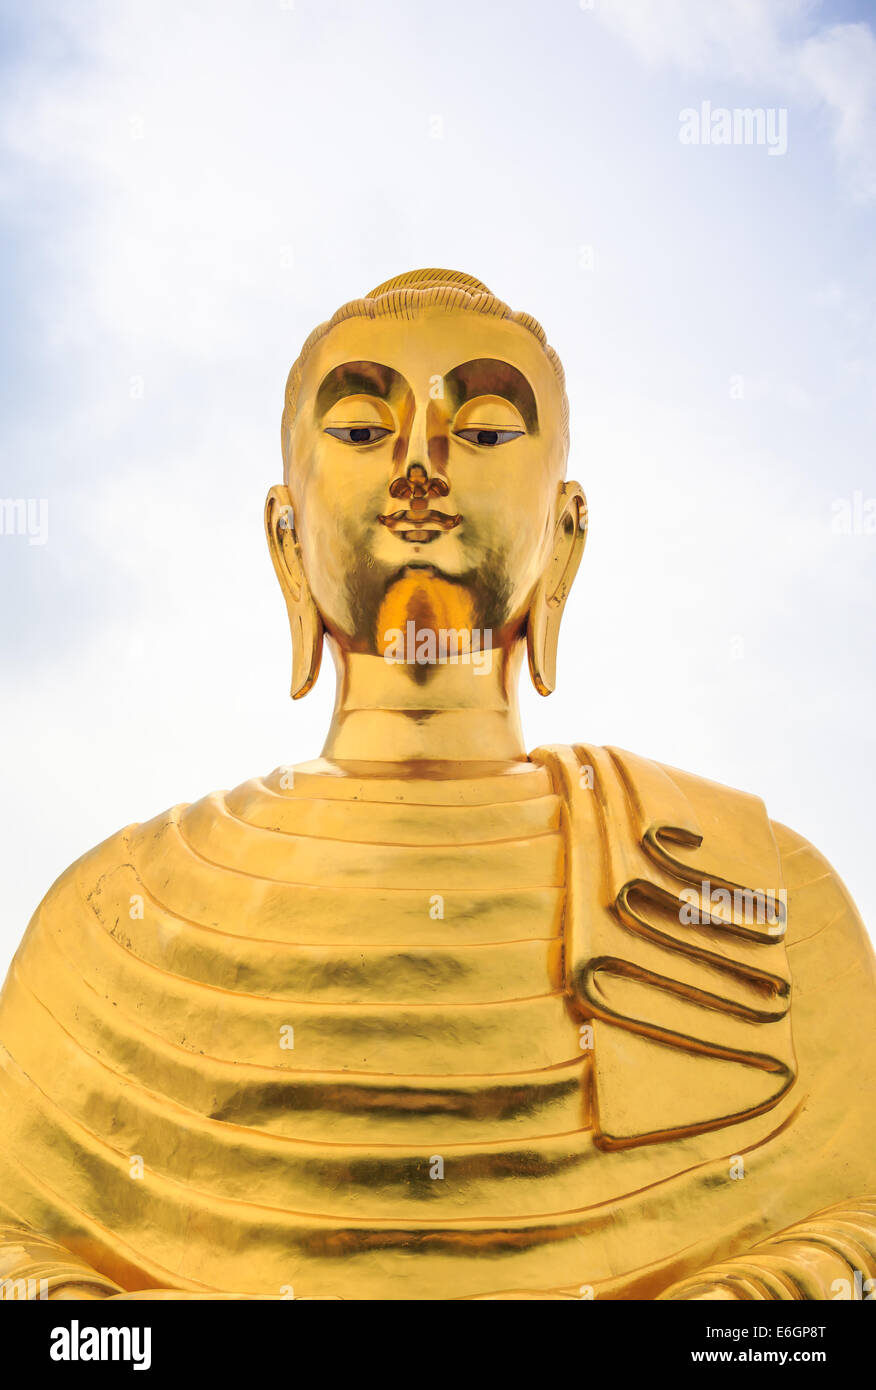 Golden Buddha's image located in a Thai temple. Stock Photo